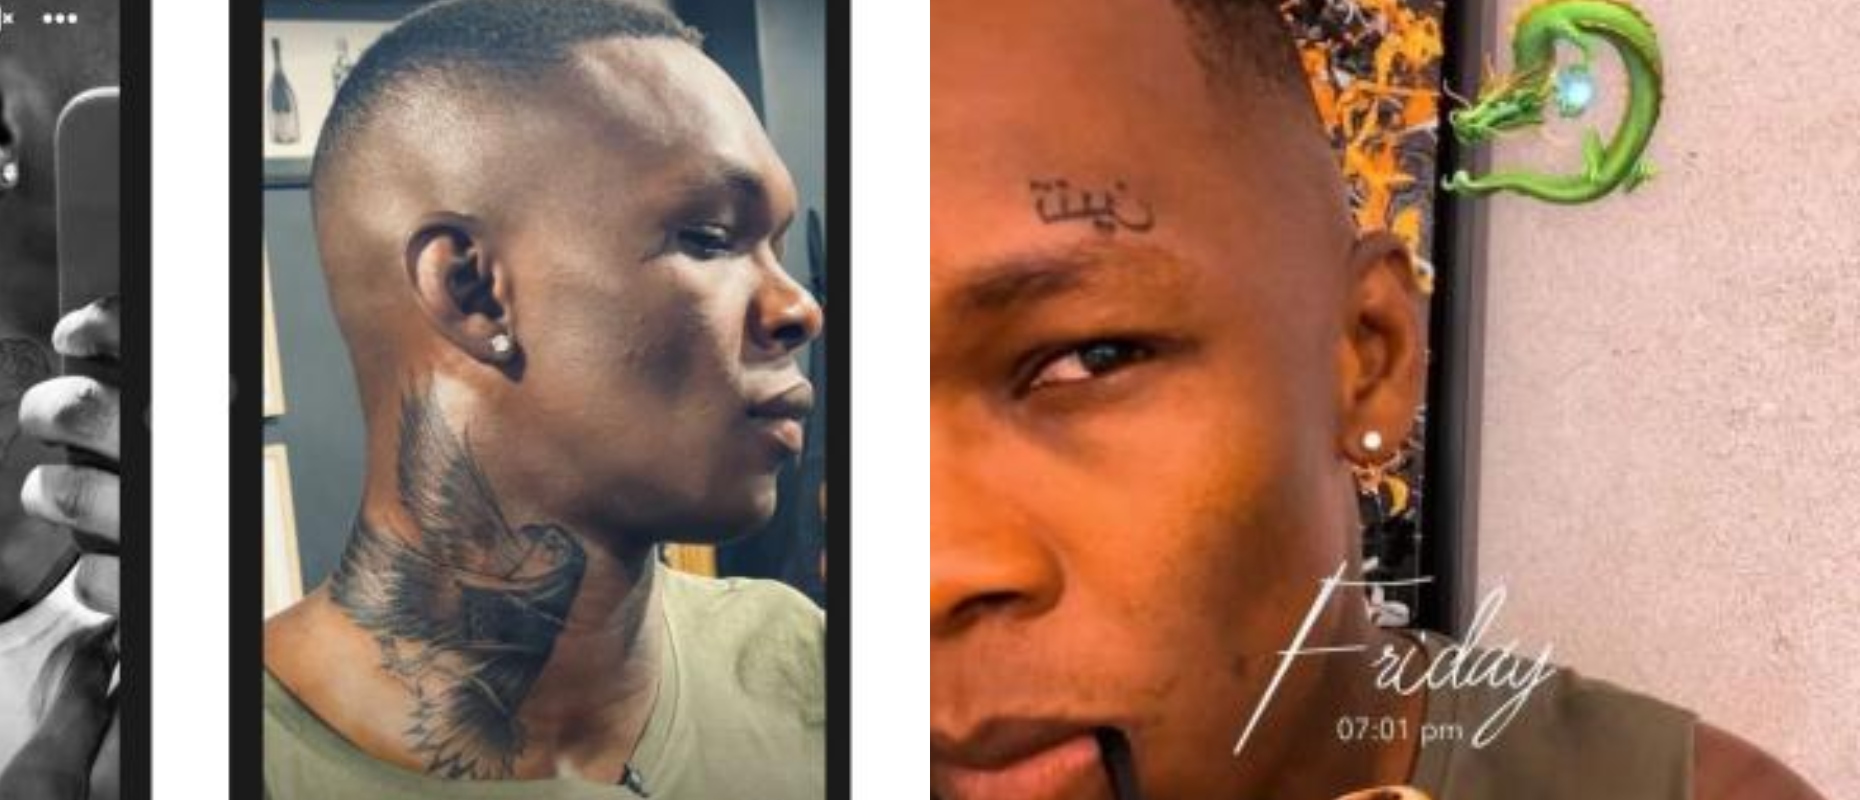 4. Fans React to Adesanya's Bold Face Tattoo - wide 1